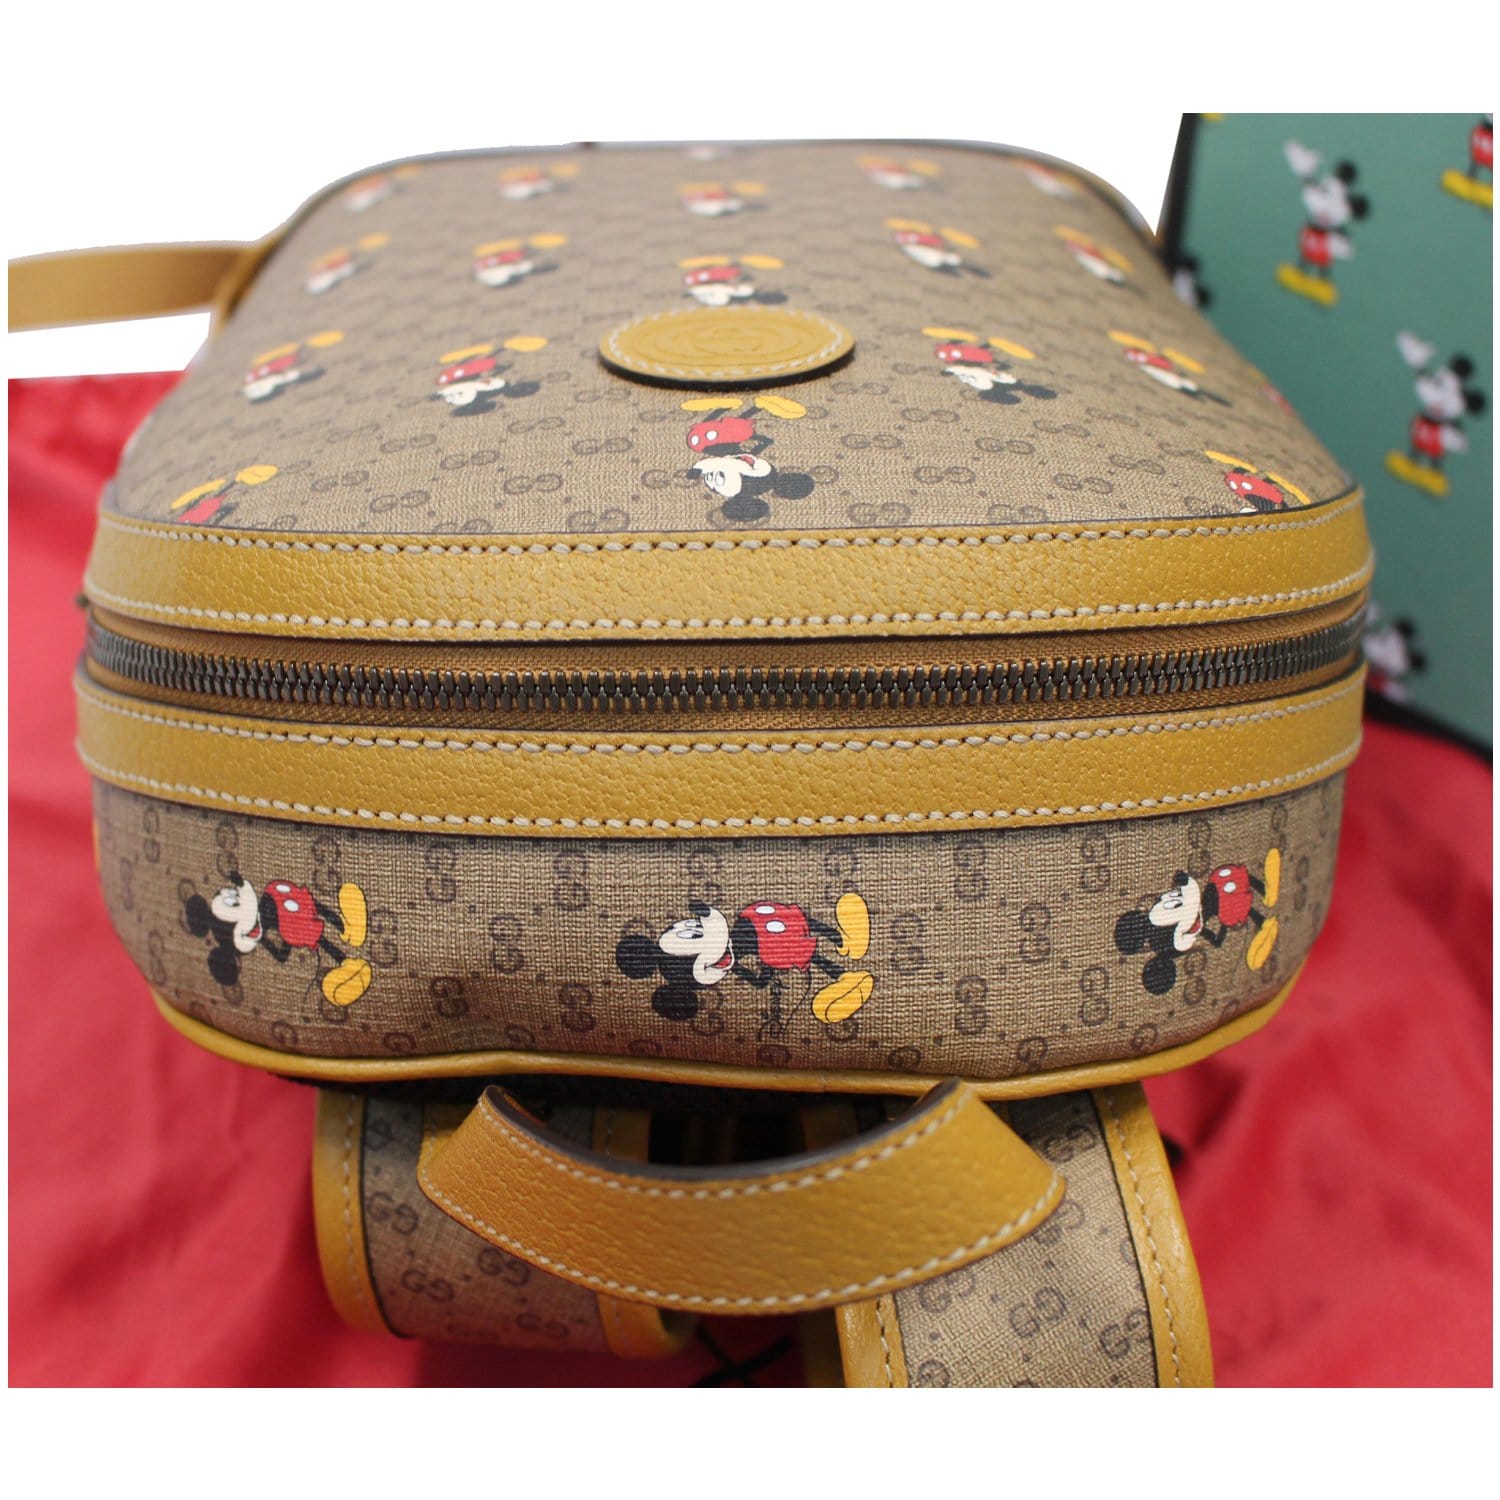 gucci small bag - Buy gucci small bag at Best Price in Malaysia